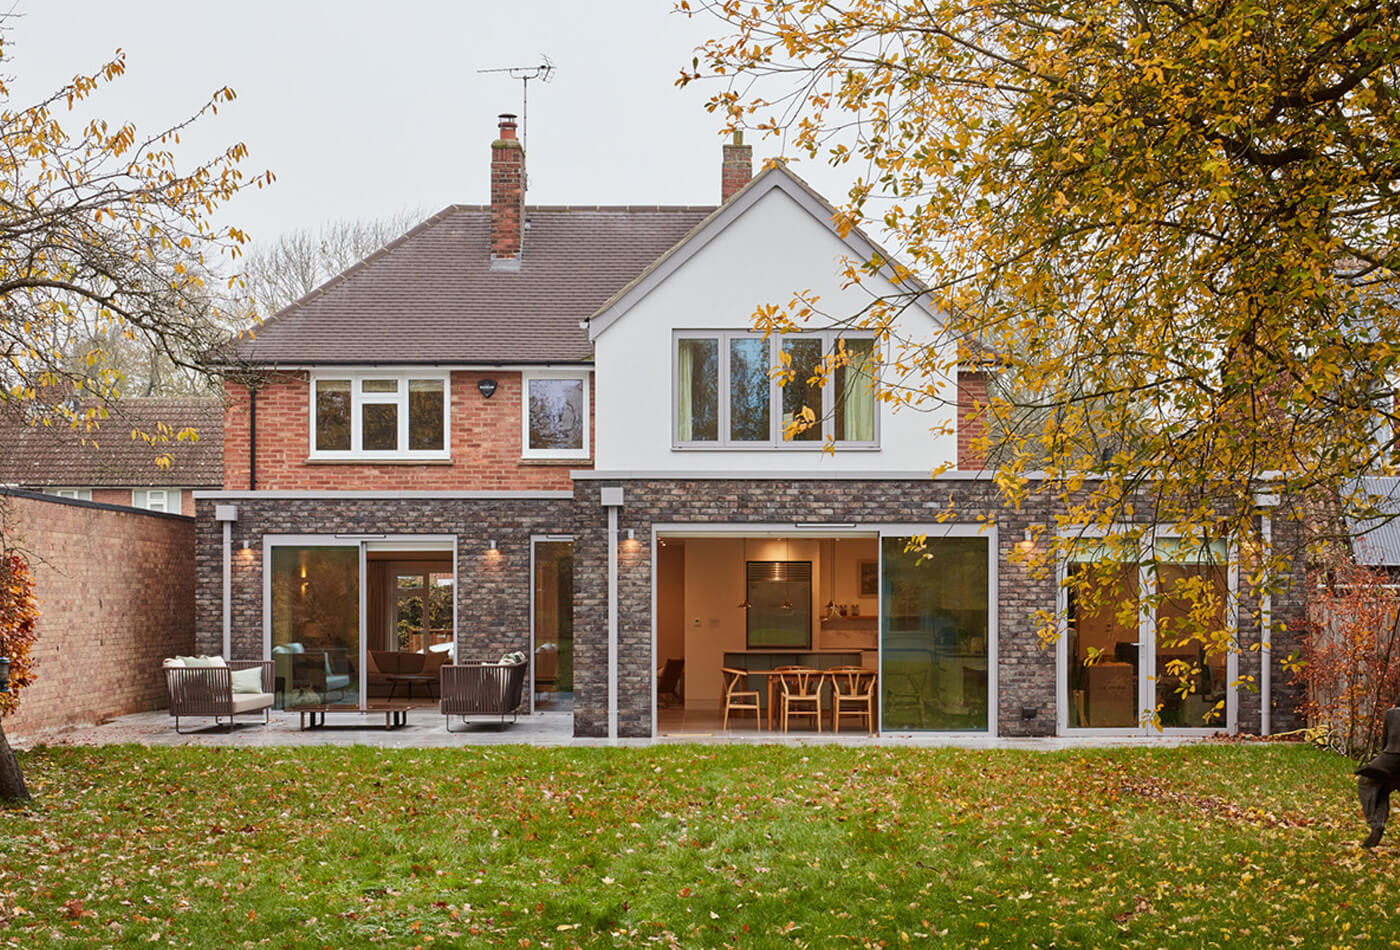 Maximize Space And Value With Home Extension This Autumn!!